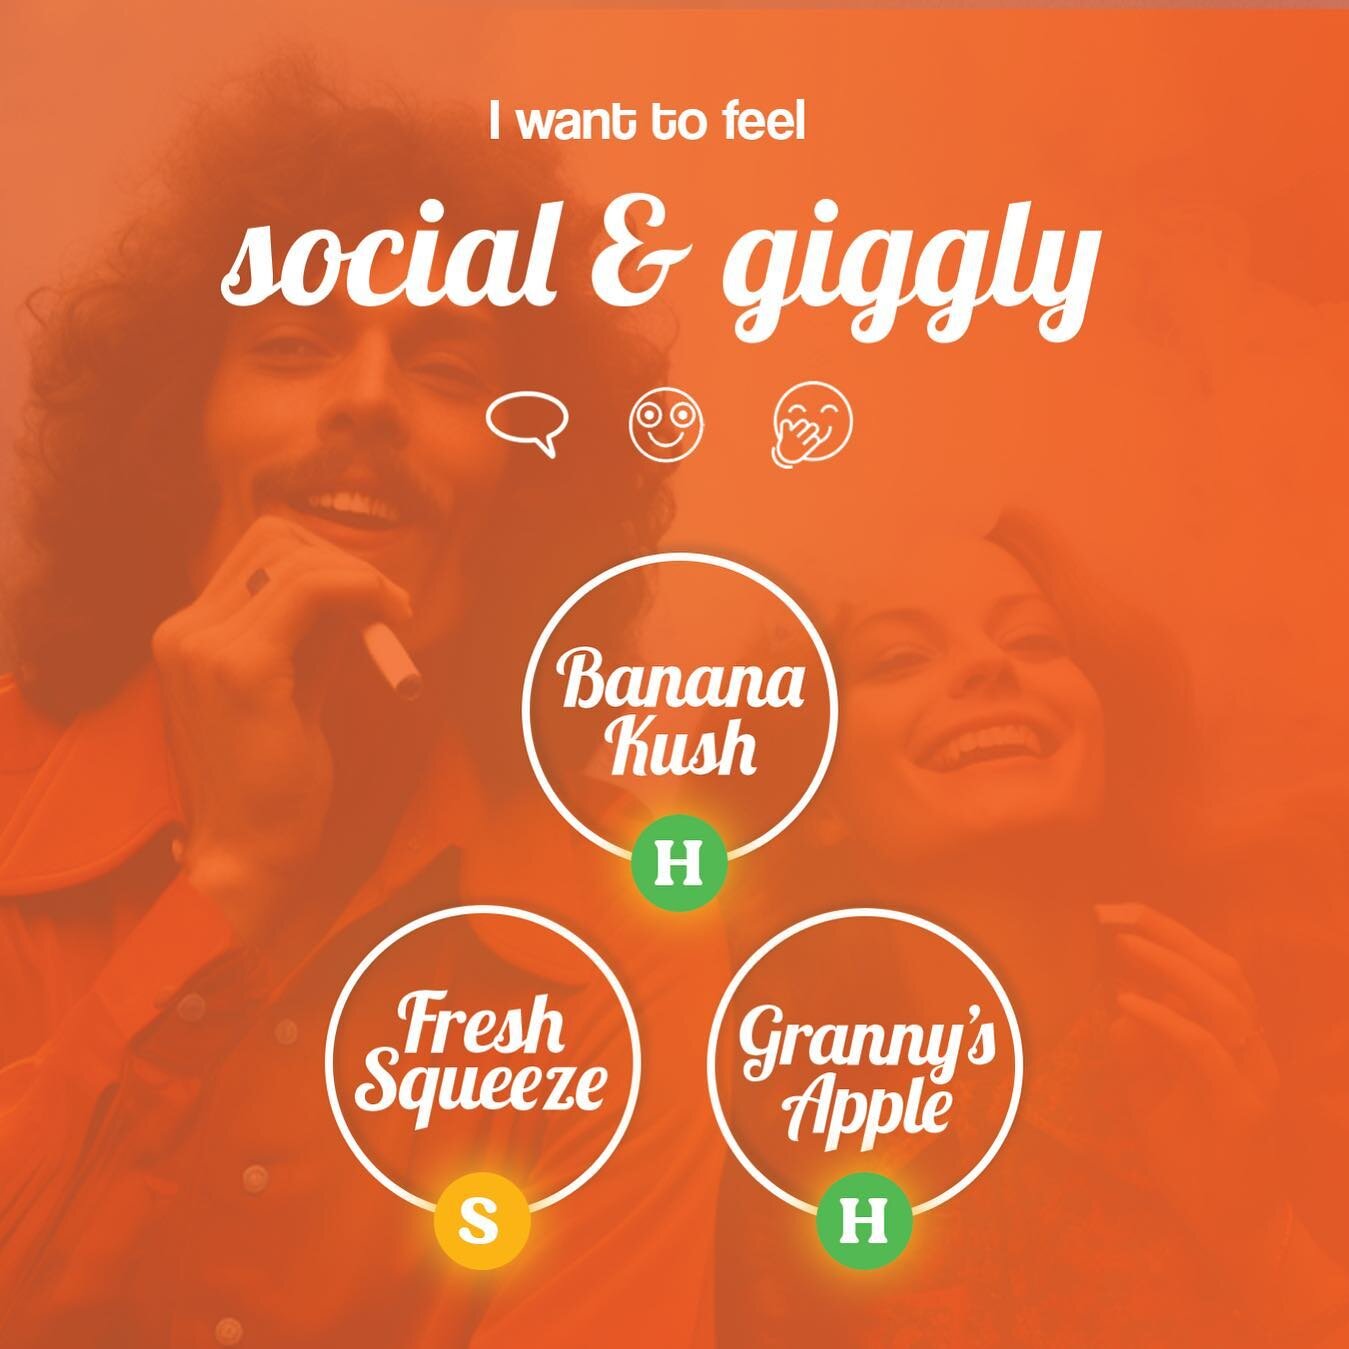 In the mood for a Social Sesh? 
These fun and flavorful strains are the perfect pairing for a good time with friends. 
- #BananaKush
- #FreshSqueeze
- #GrannysApple 

Have you tried any of these strains lately???